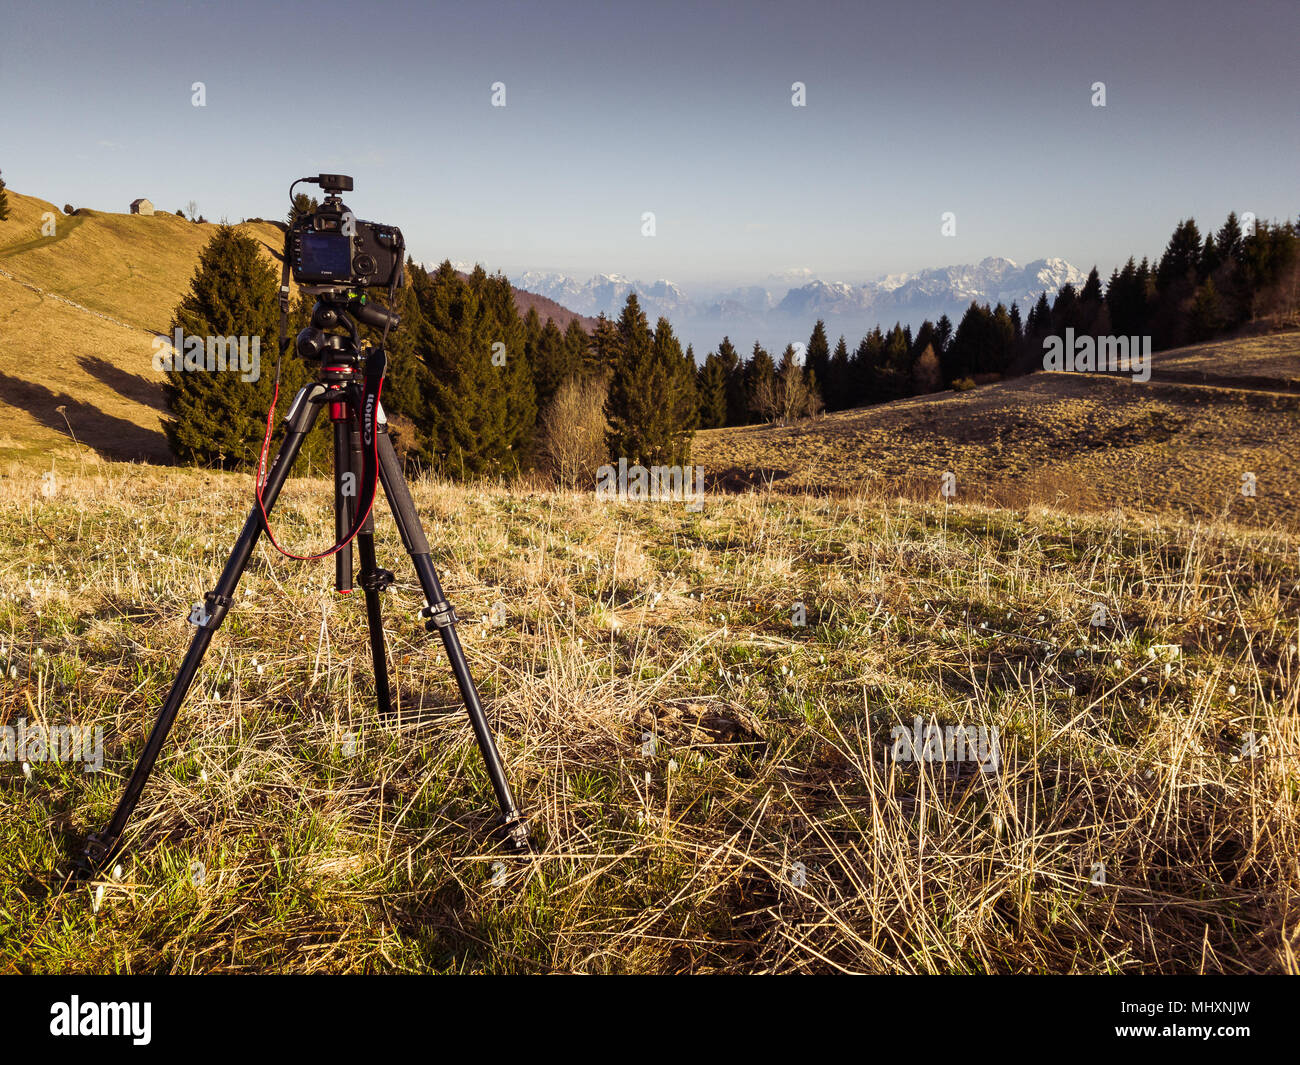 Making timelapse with Canon camera on tripod Stock Photo